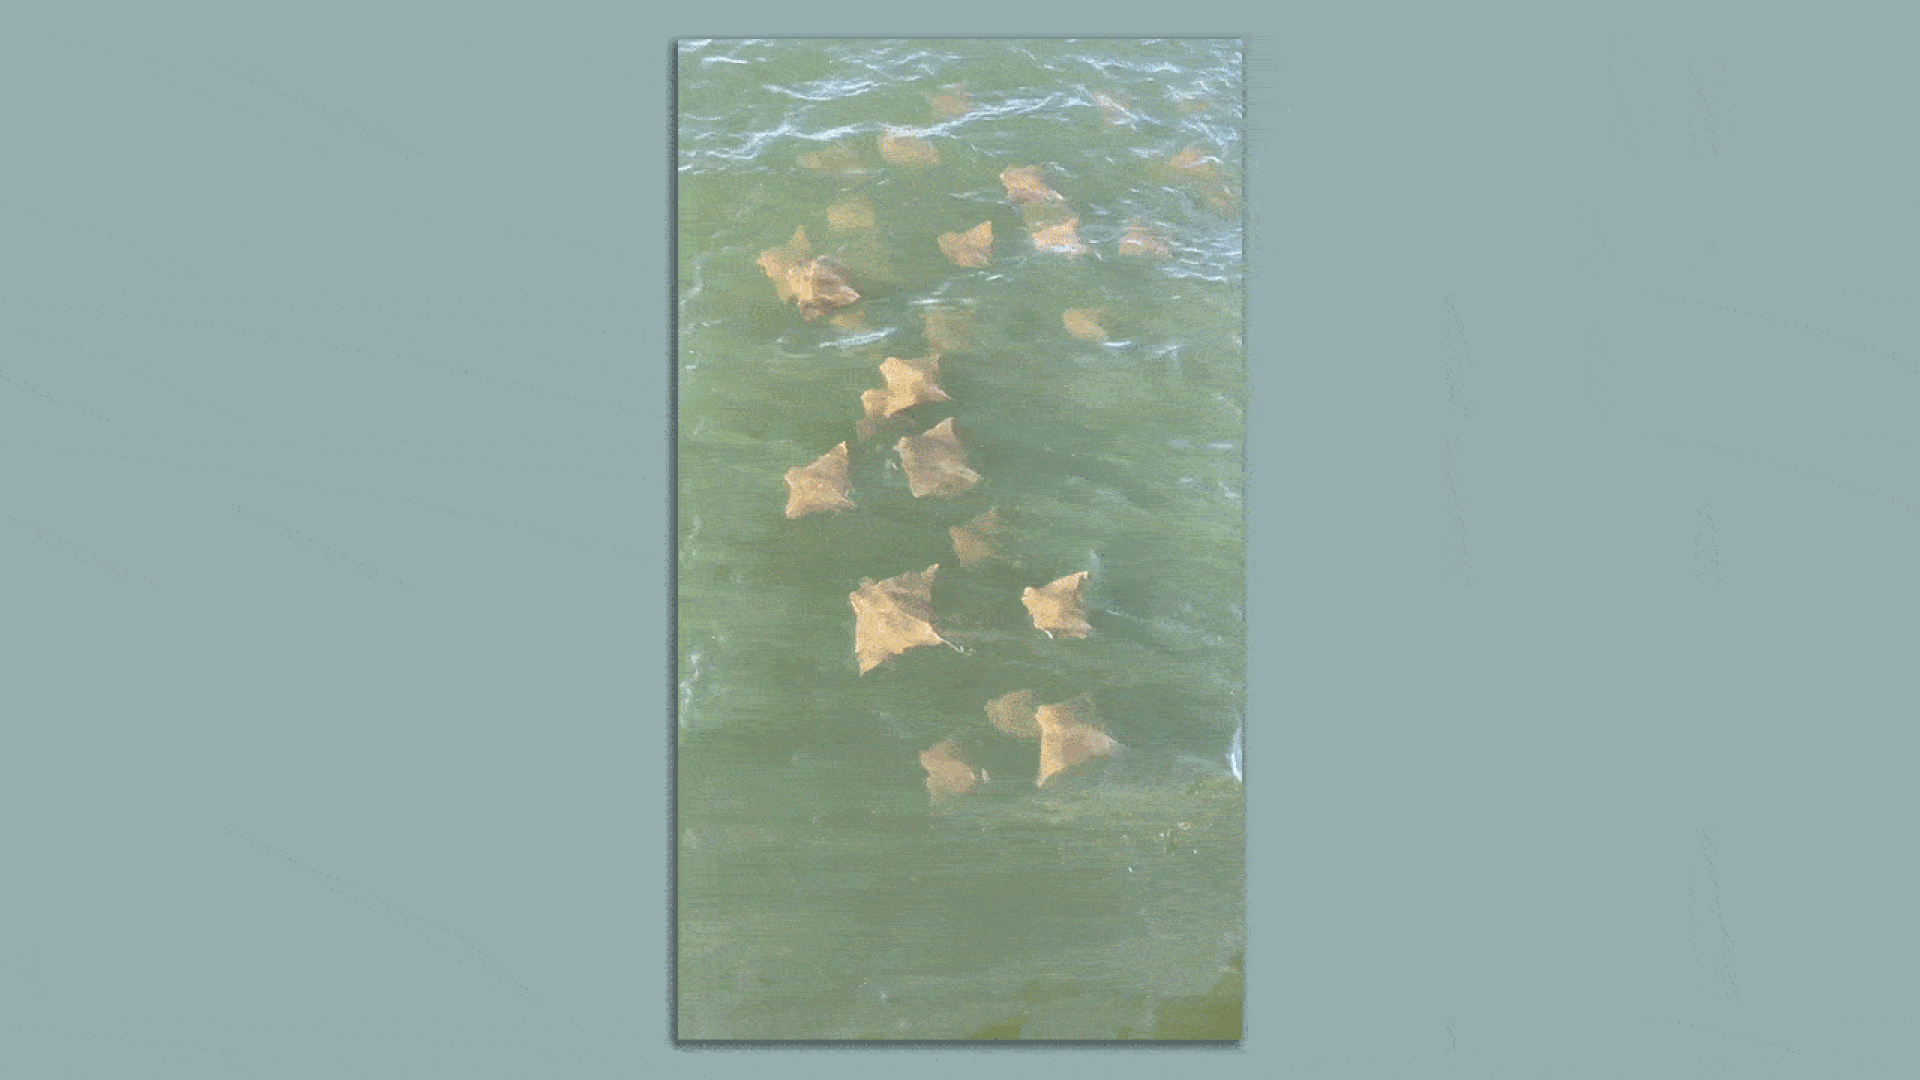 A gif of swimming sting rays.